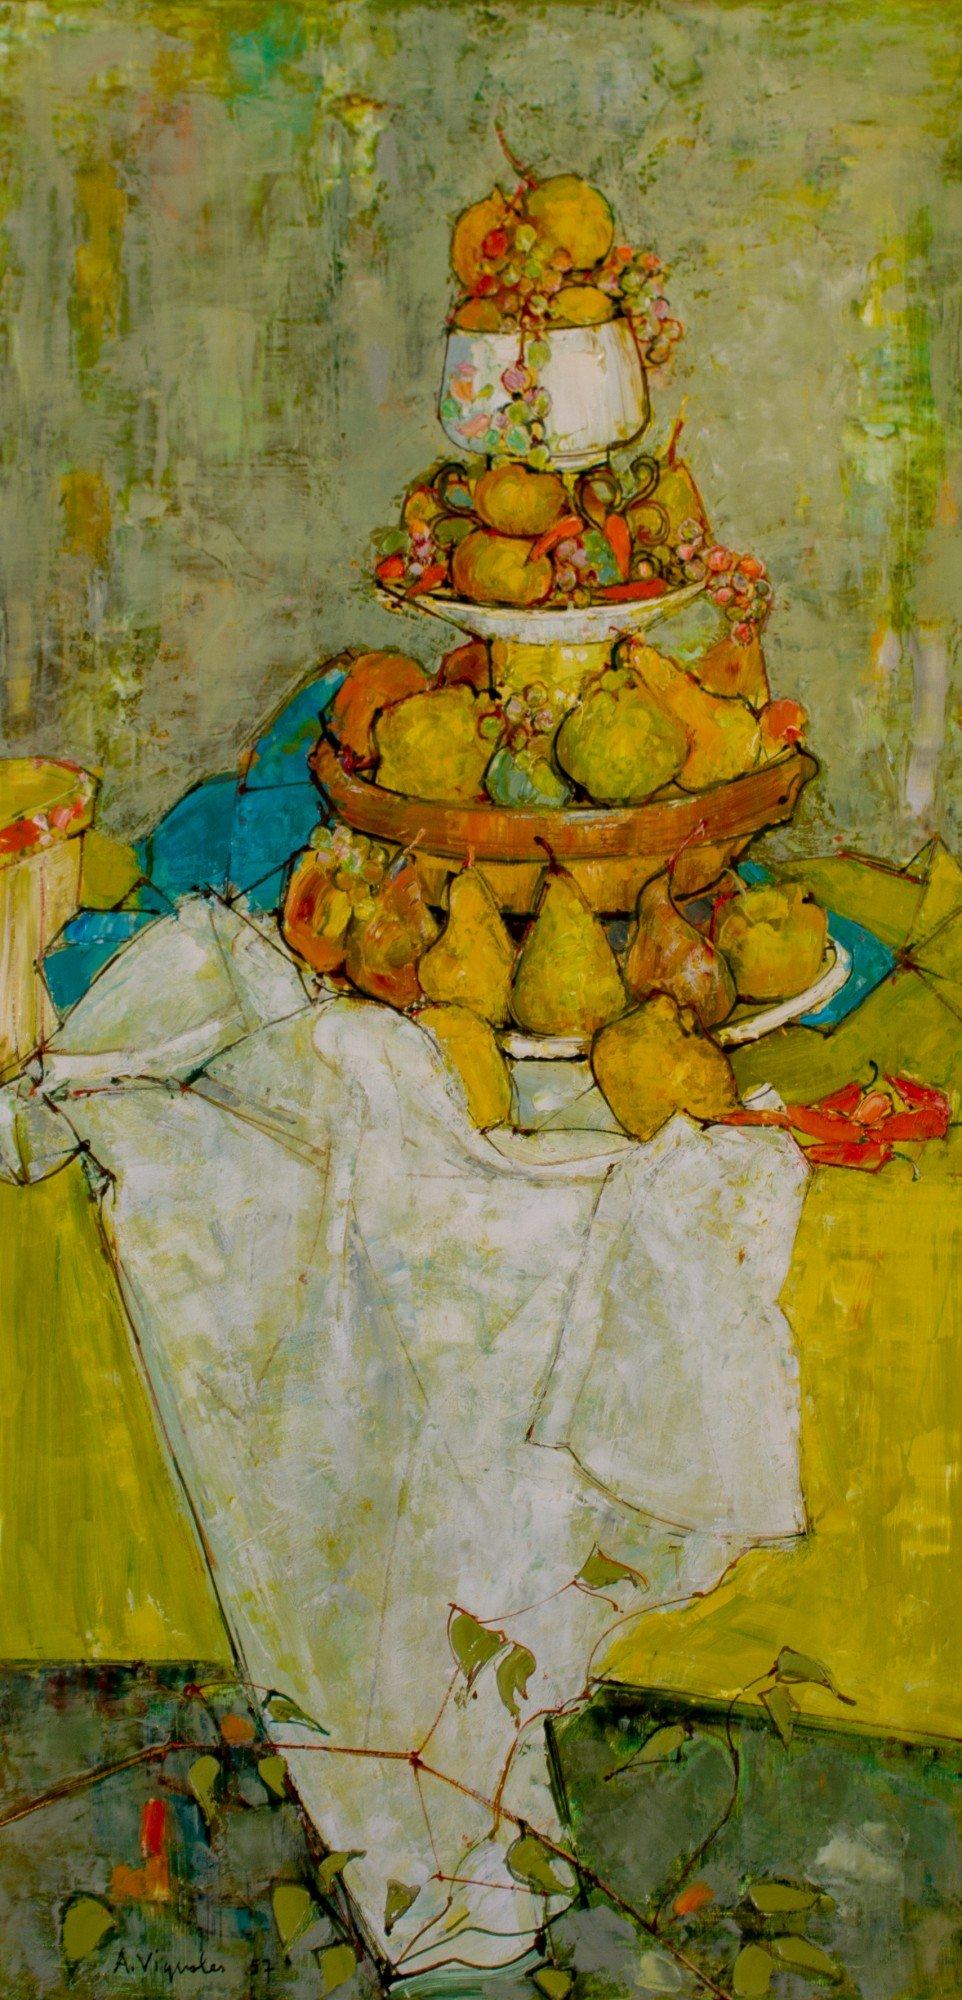 Pears and Peppers, Vibrant 20th century still-life painting - Painting by Andre Vignoles